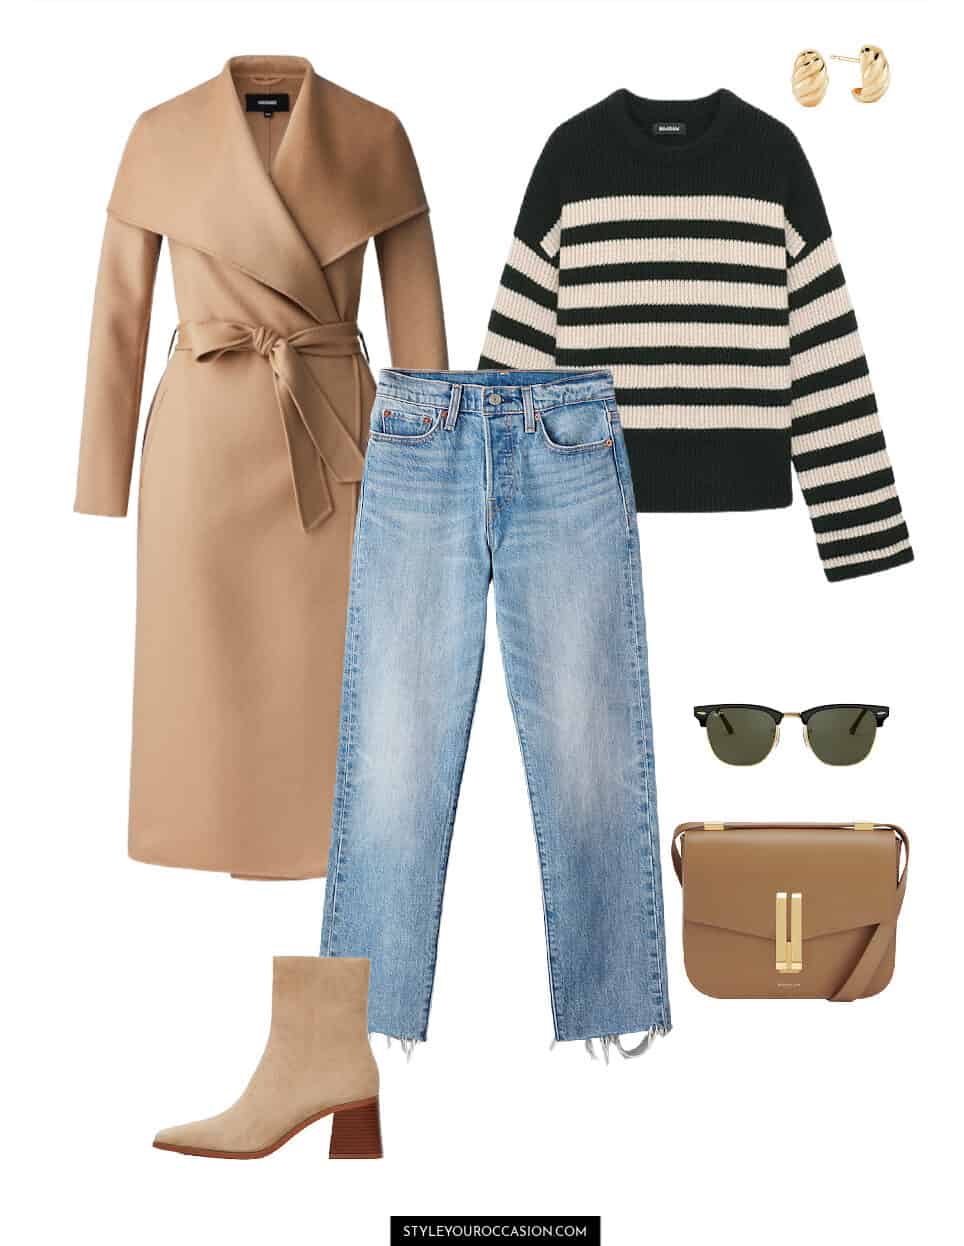 image of an outfit with a black and white striped sweater, long camel wool coat, blue jeans, suede ankle boots, and a brown crossbody bag